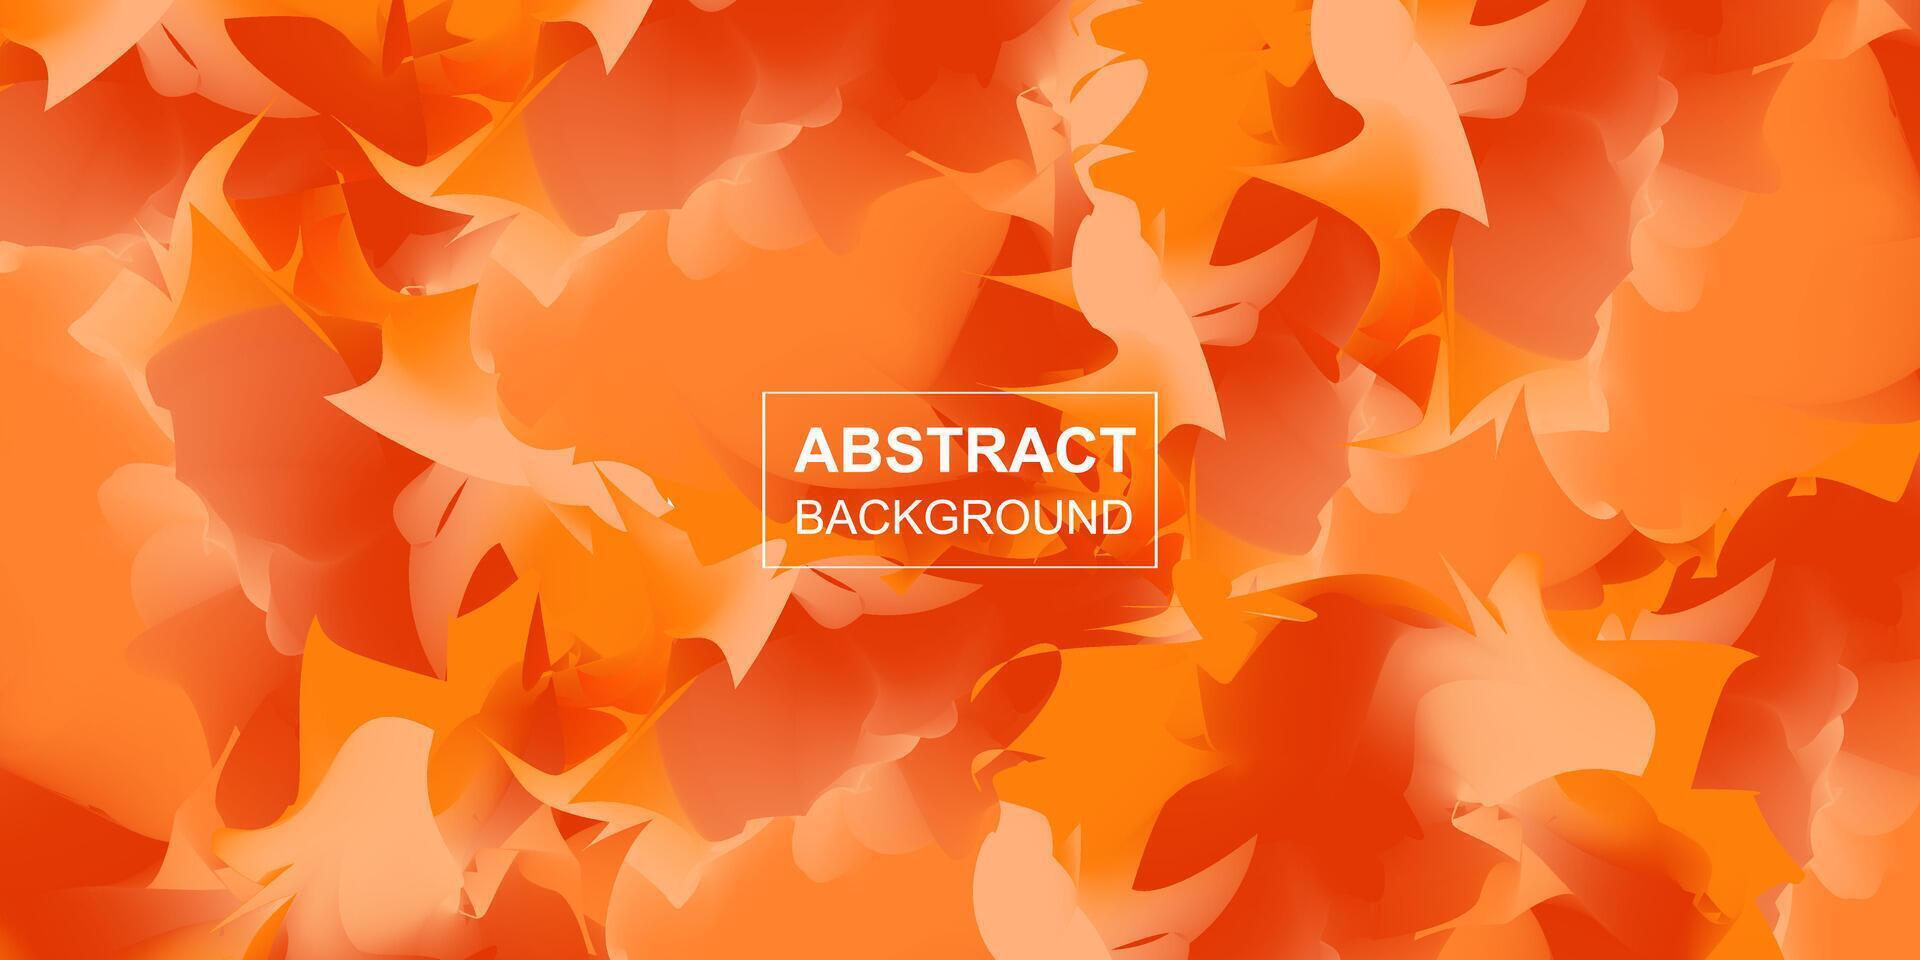 Watercolor orange background abstract hand drawn style for business.Vector illustration poster banner template design vector